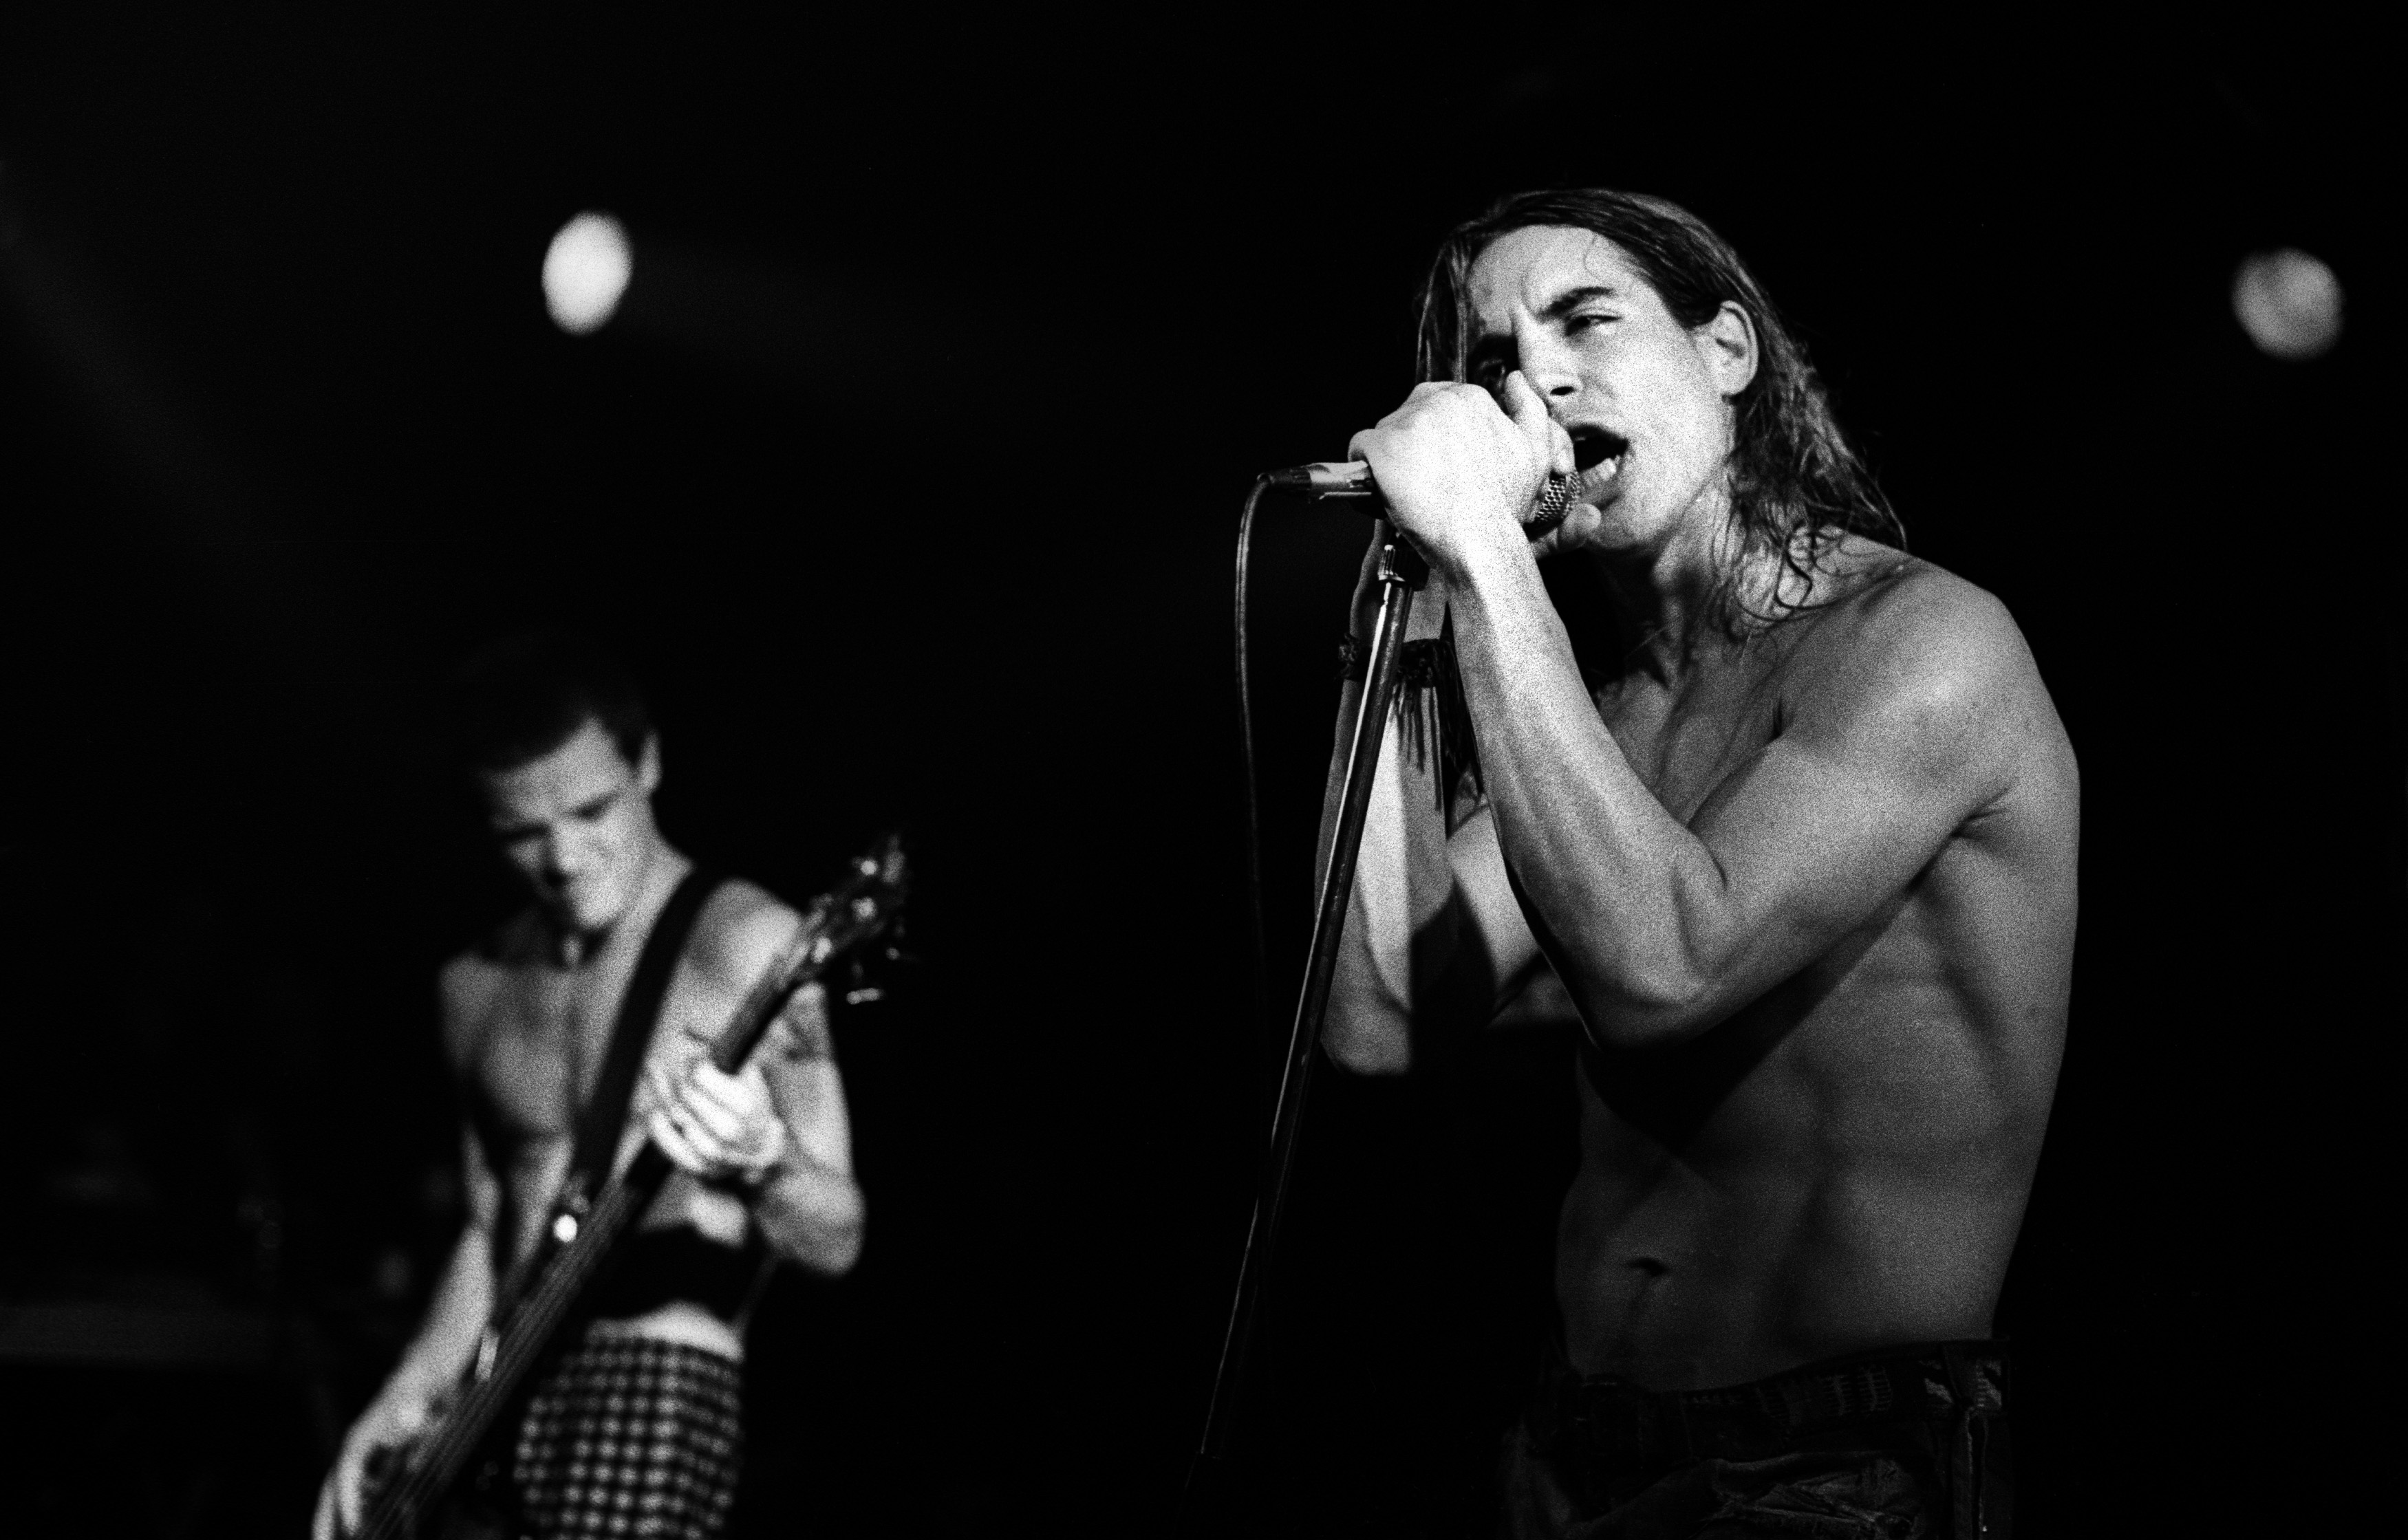 Red Hot Chili Peppers: Our 1990 Cover Story